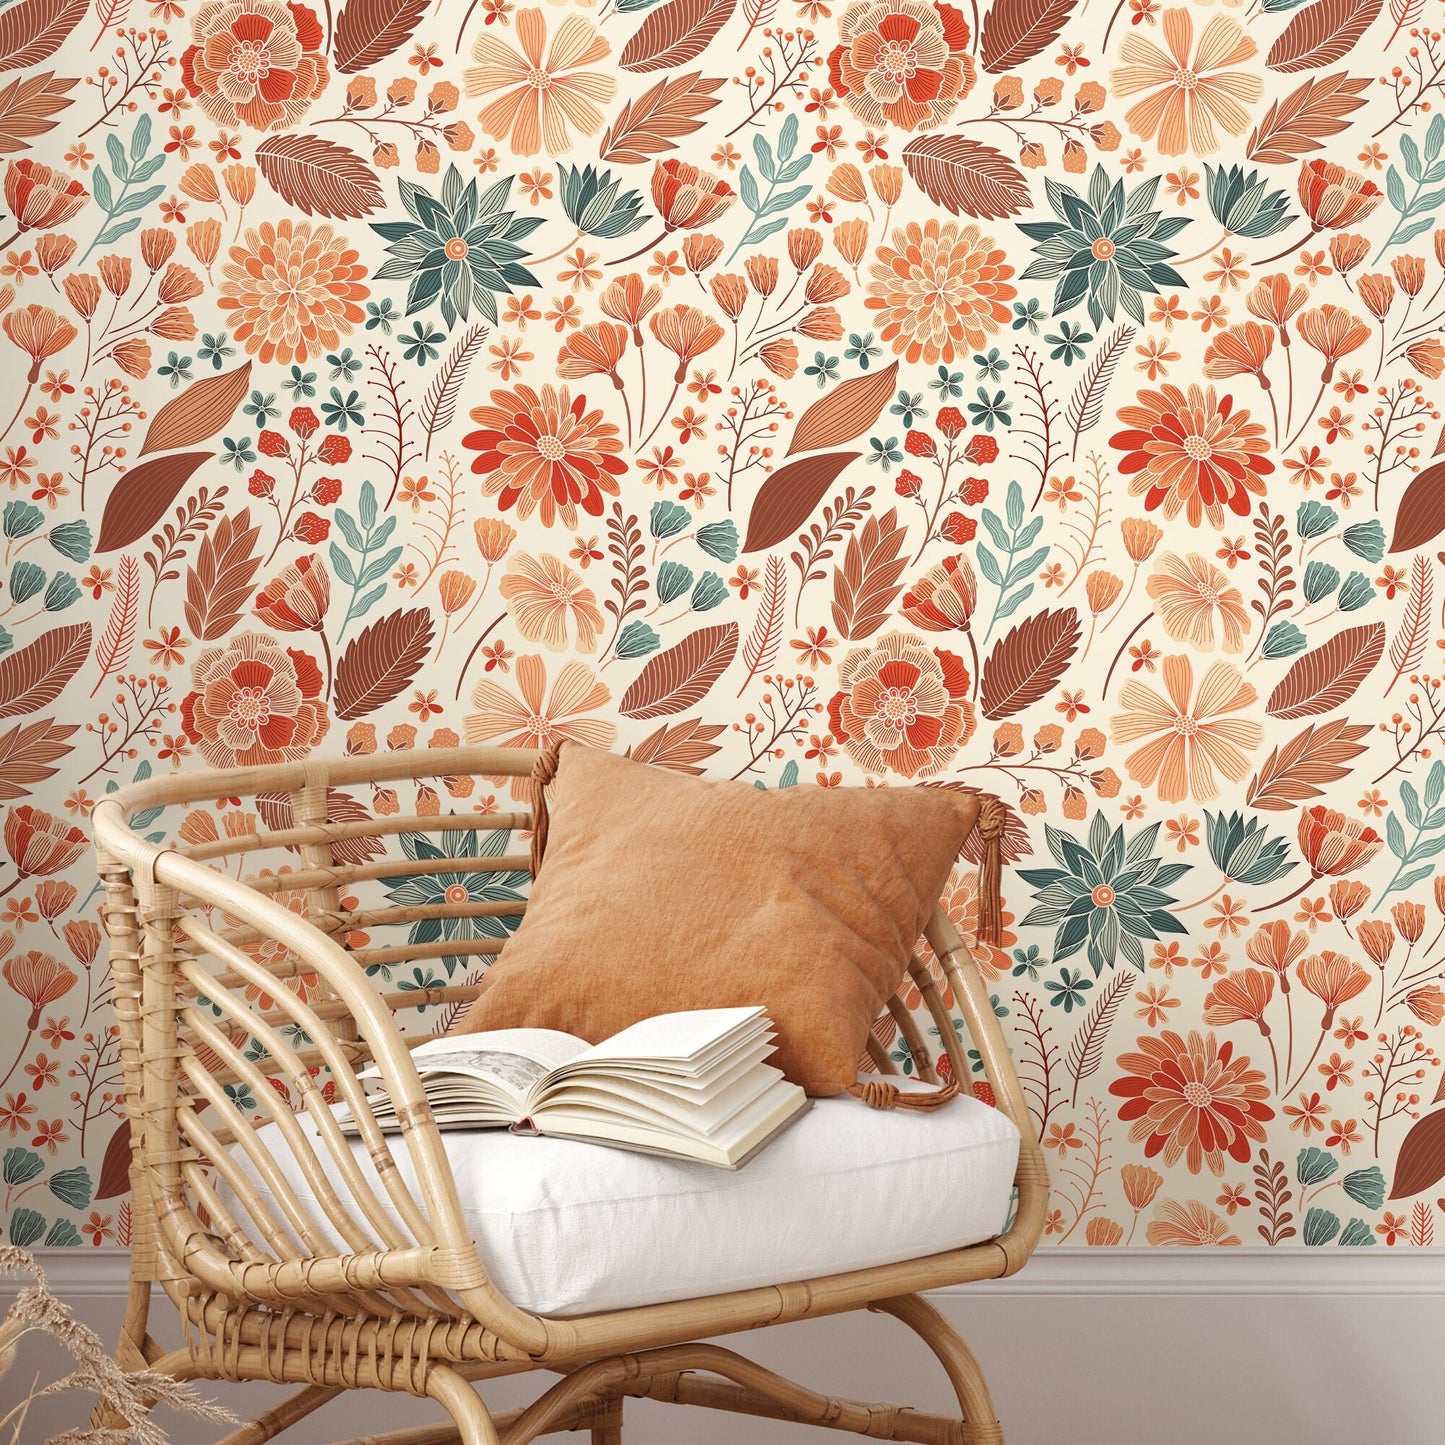 Wallpaper Peel and Stick Wallpaper Removable Wallpaper Home Decor Wall Art Wall Decor Room Decor / Orange Floral Drawing Wallpaper - C310